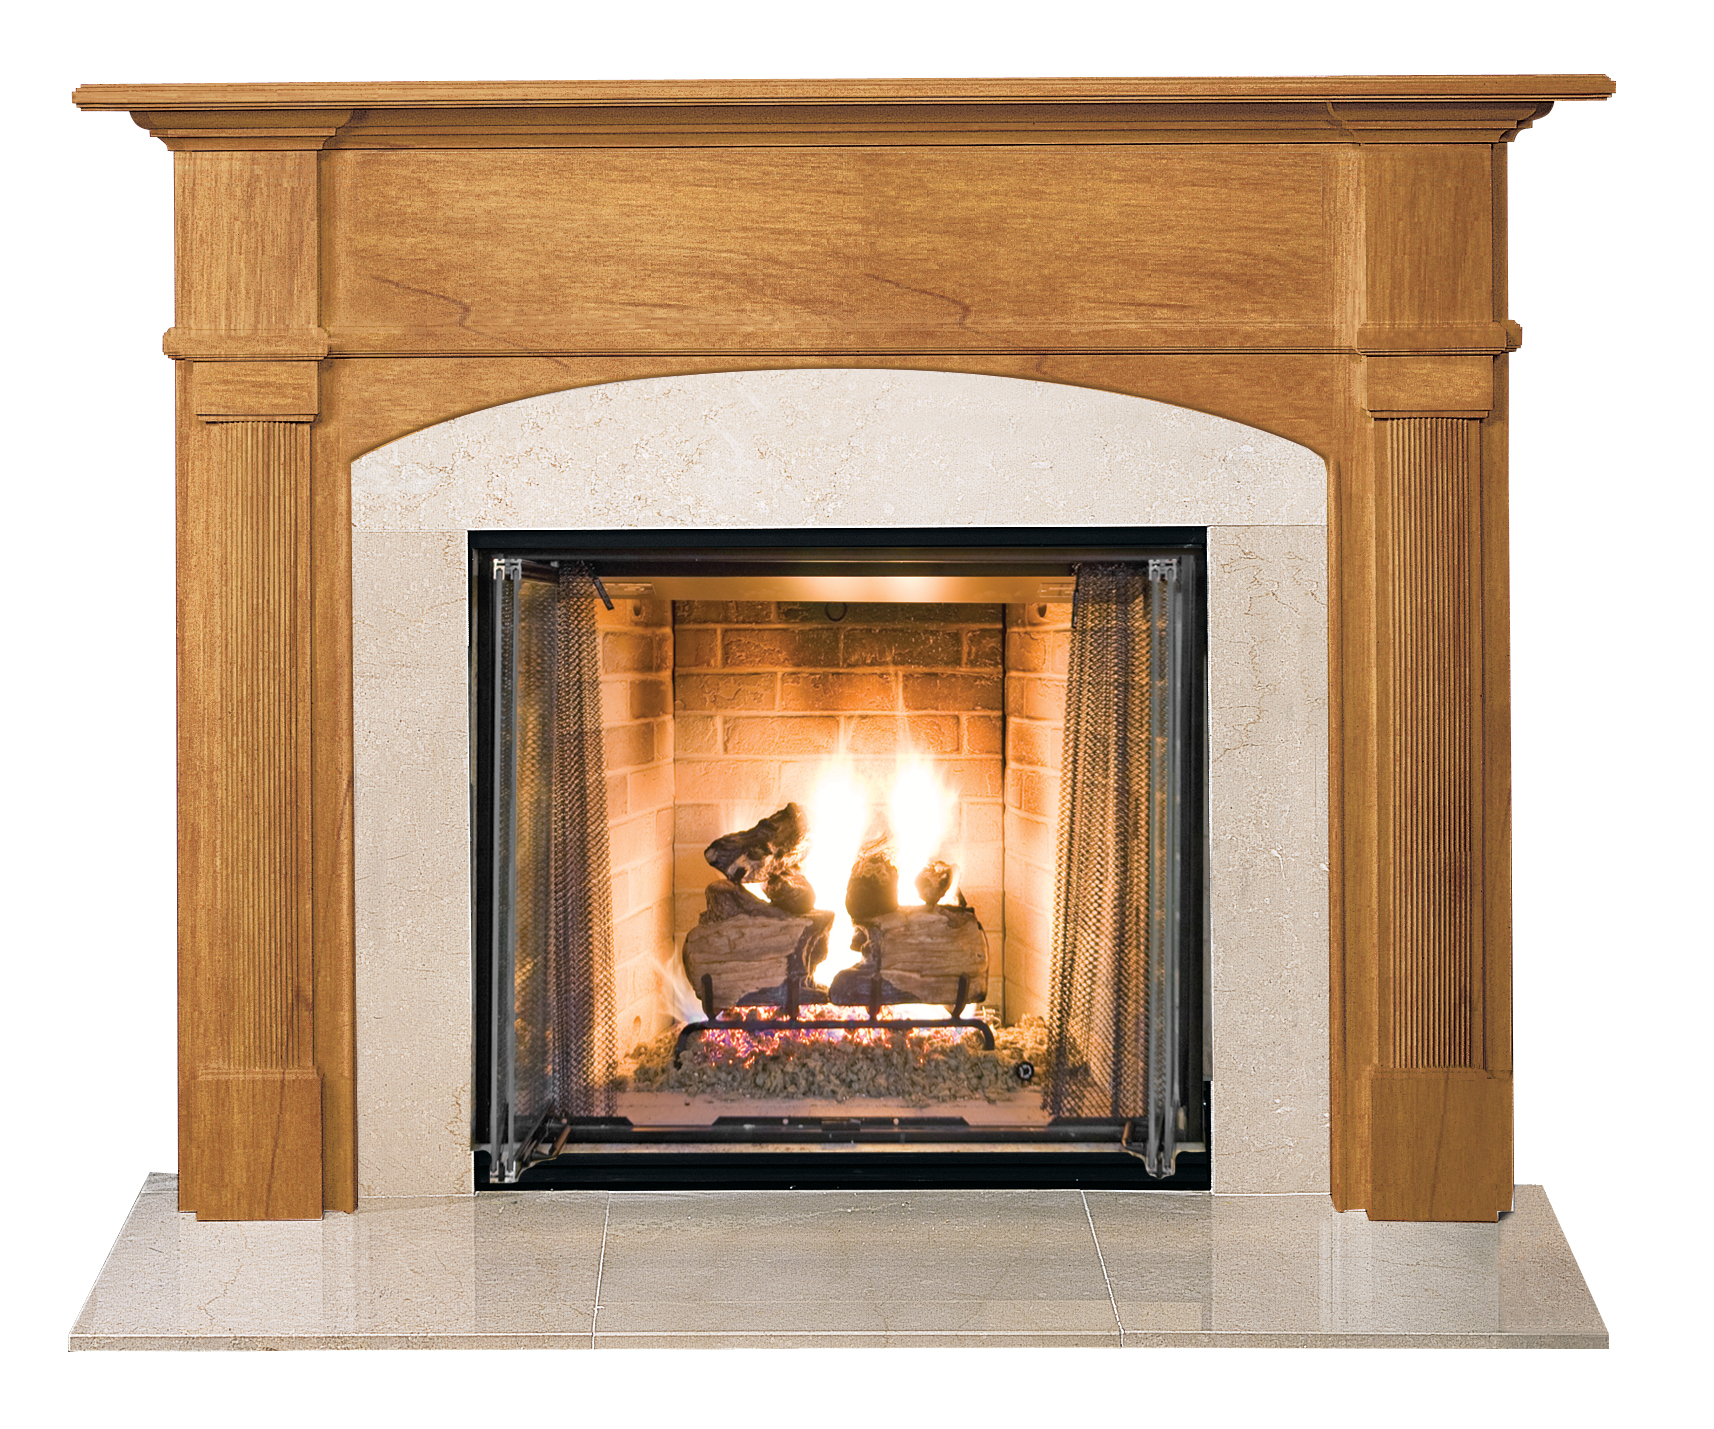 The Arched Wilson by Forshaw Mantels is the epitome of classic elegance, boasting clean lines, rounded leg columns, and double step-back legs.